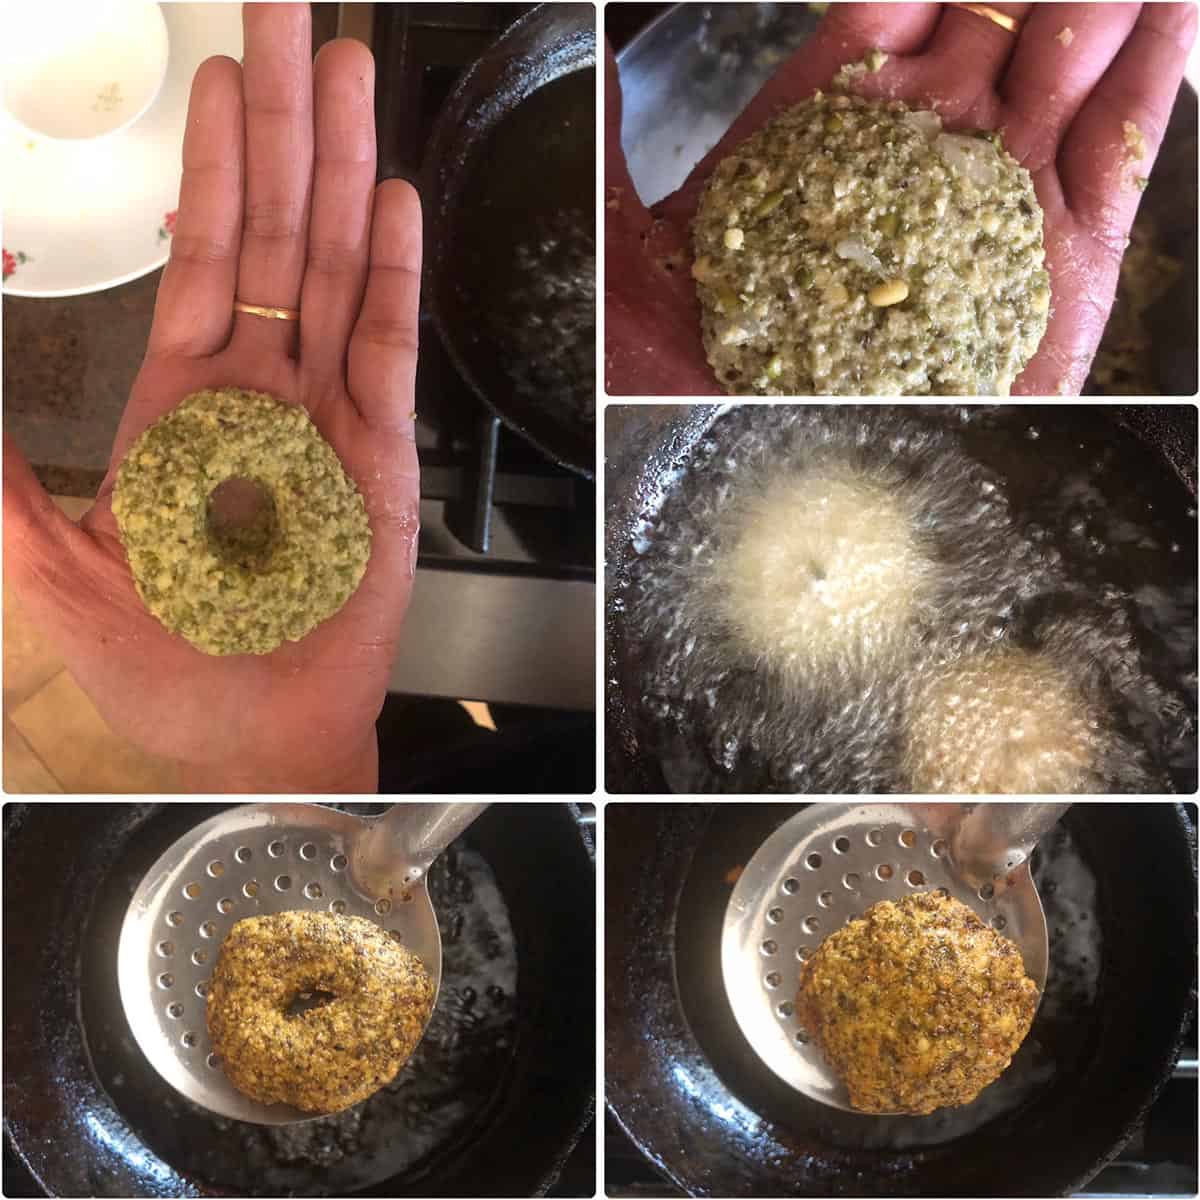 Shaping and frying the dal pakoda until crispy and golden